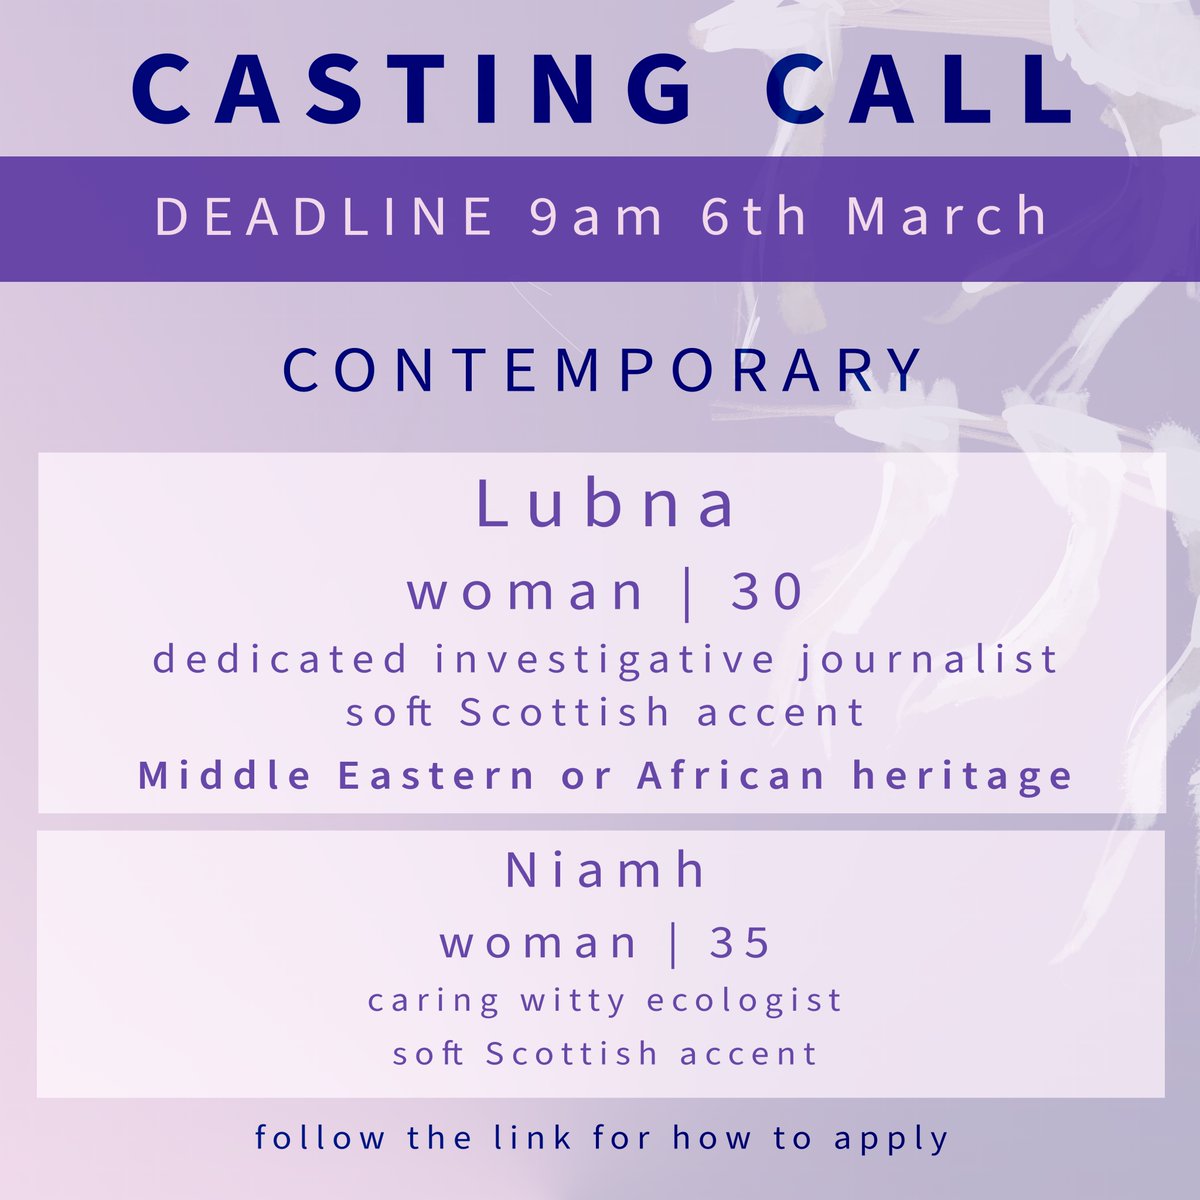 CASTING CALL We are seeking women-presenting actors of Middle Eastern / African heritage for the role of Lubna. These issues are not exclusive to any background, but the issue of gender inequality in medicine is exacerbated for women of colour. ➡️ vividrootscollective.co.uk/wound-rag-in-b…